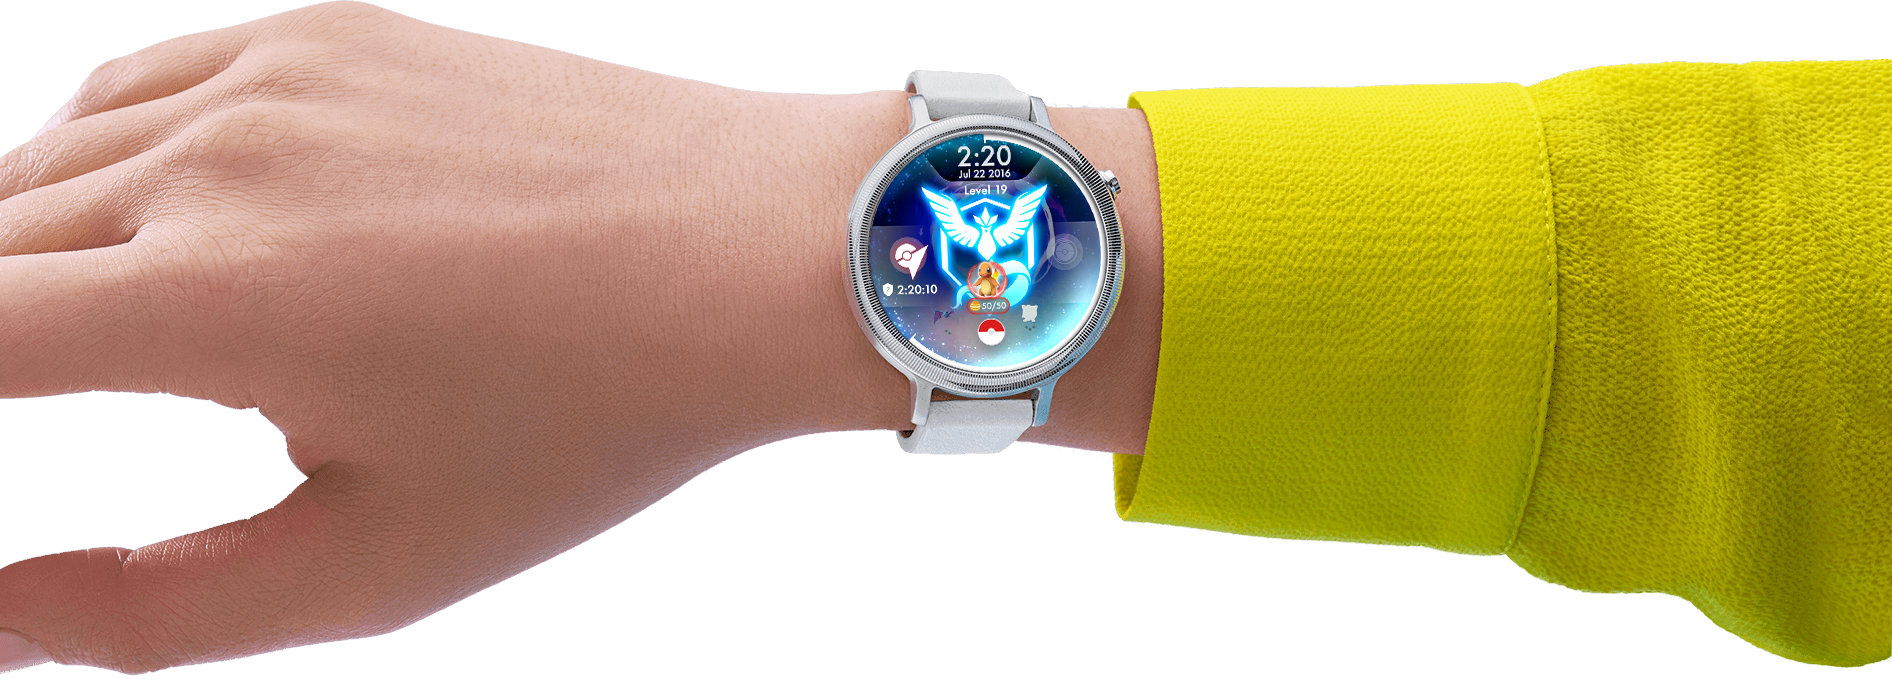 Pokémon Go, real-world gaming and smartwatches by Vardi | Little Labs | Medium